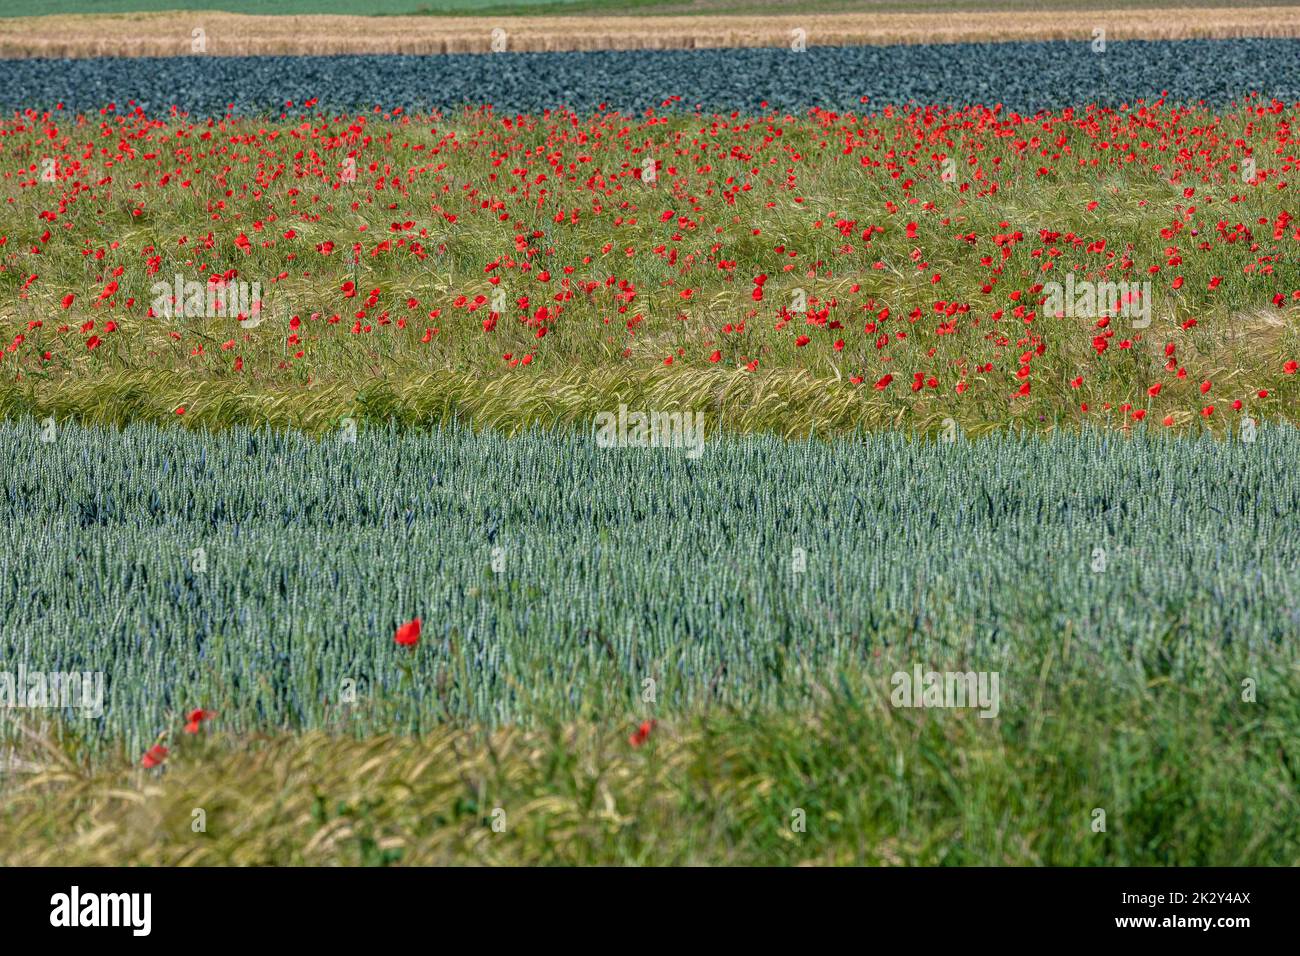 scenic grain fields with poppies in between Stock Photo